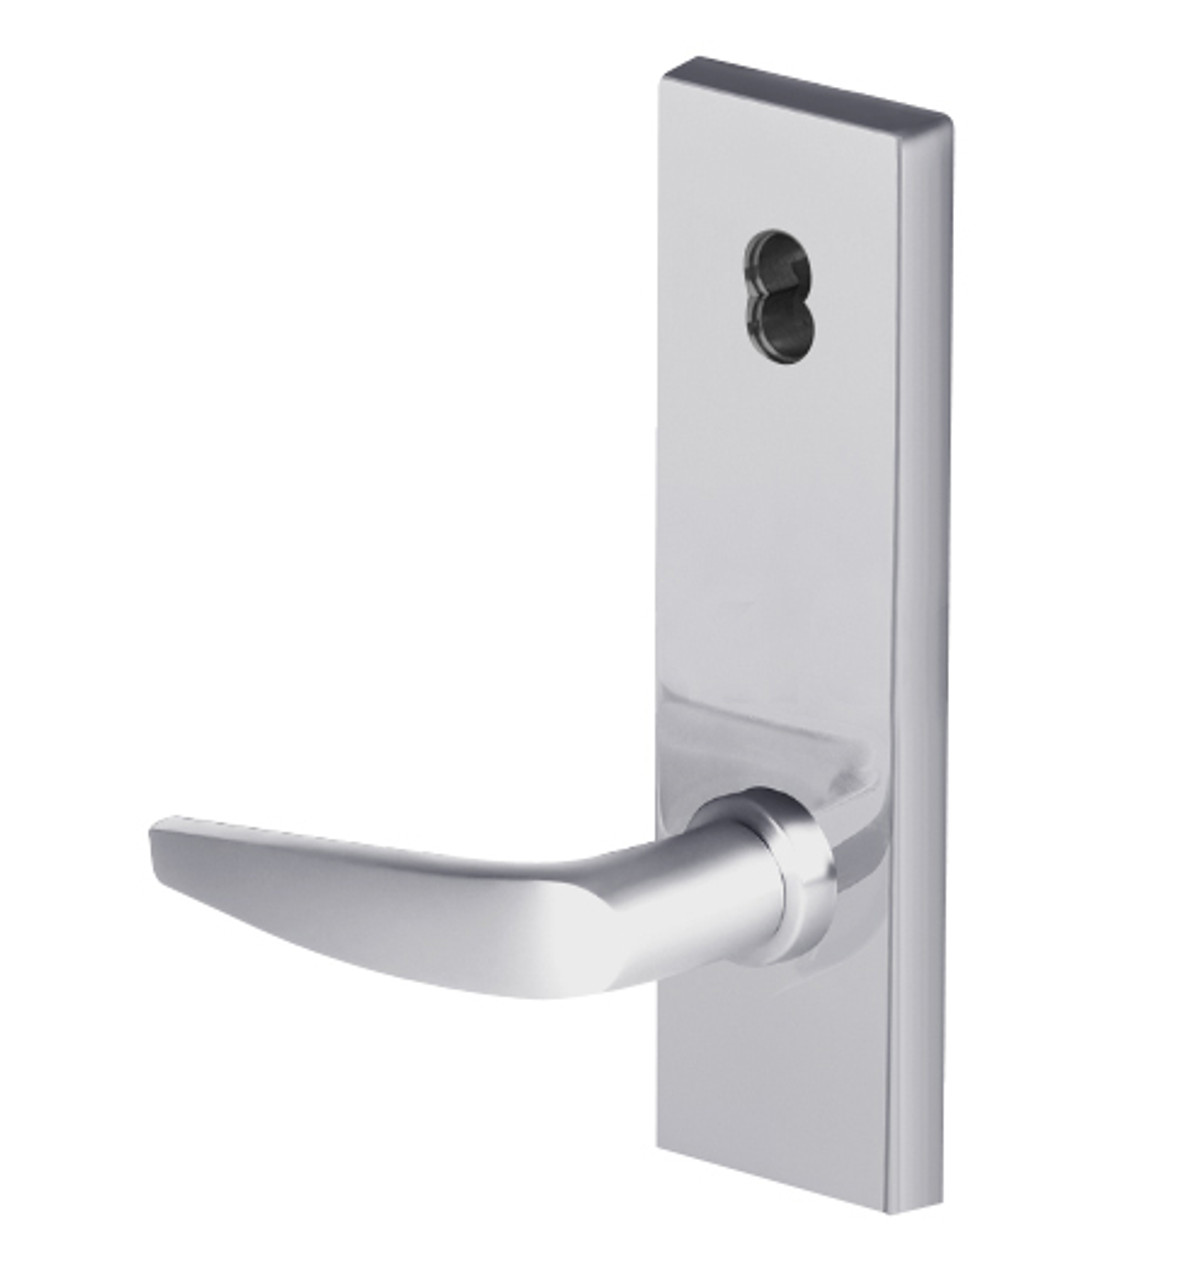 45HW7TWEL16N626 Best 40HW series Double Key Deadbolt Fail Safe Electromechanical Mortise Lever Lock with Curved w/ No Return Style in Satin Chrome